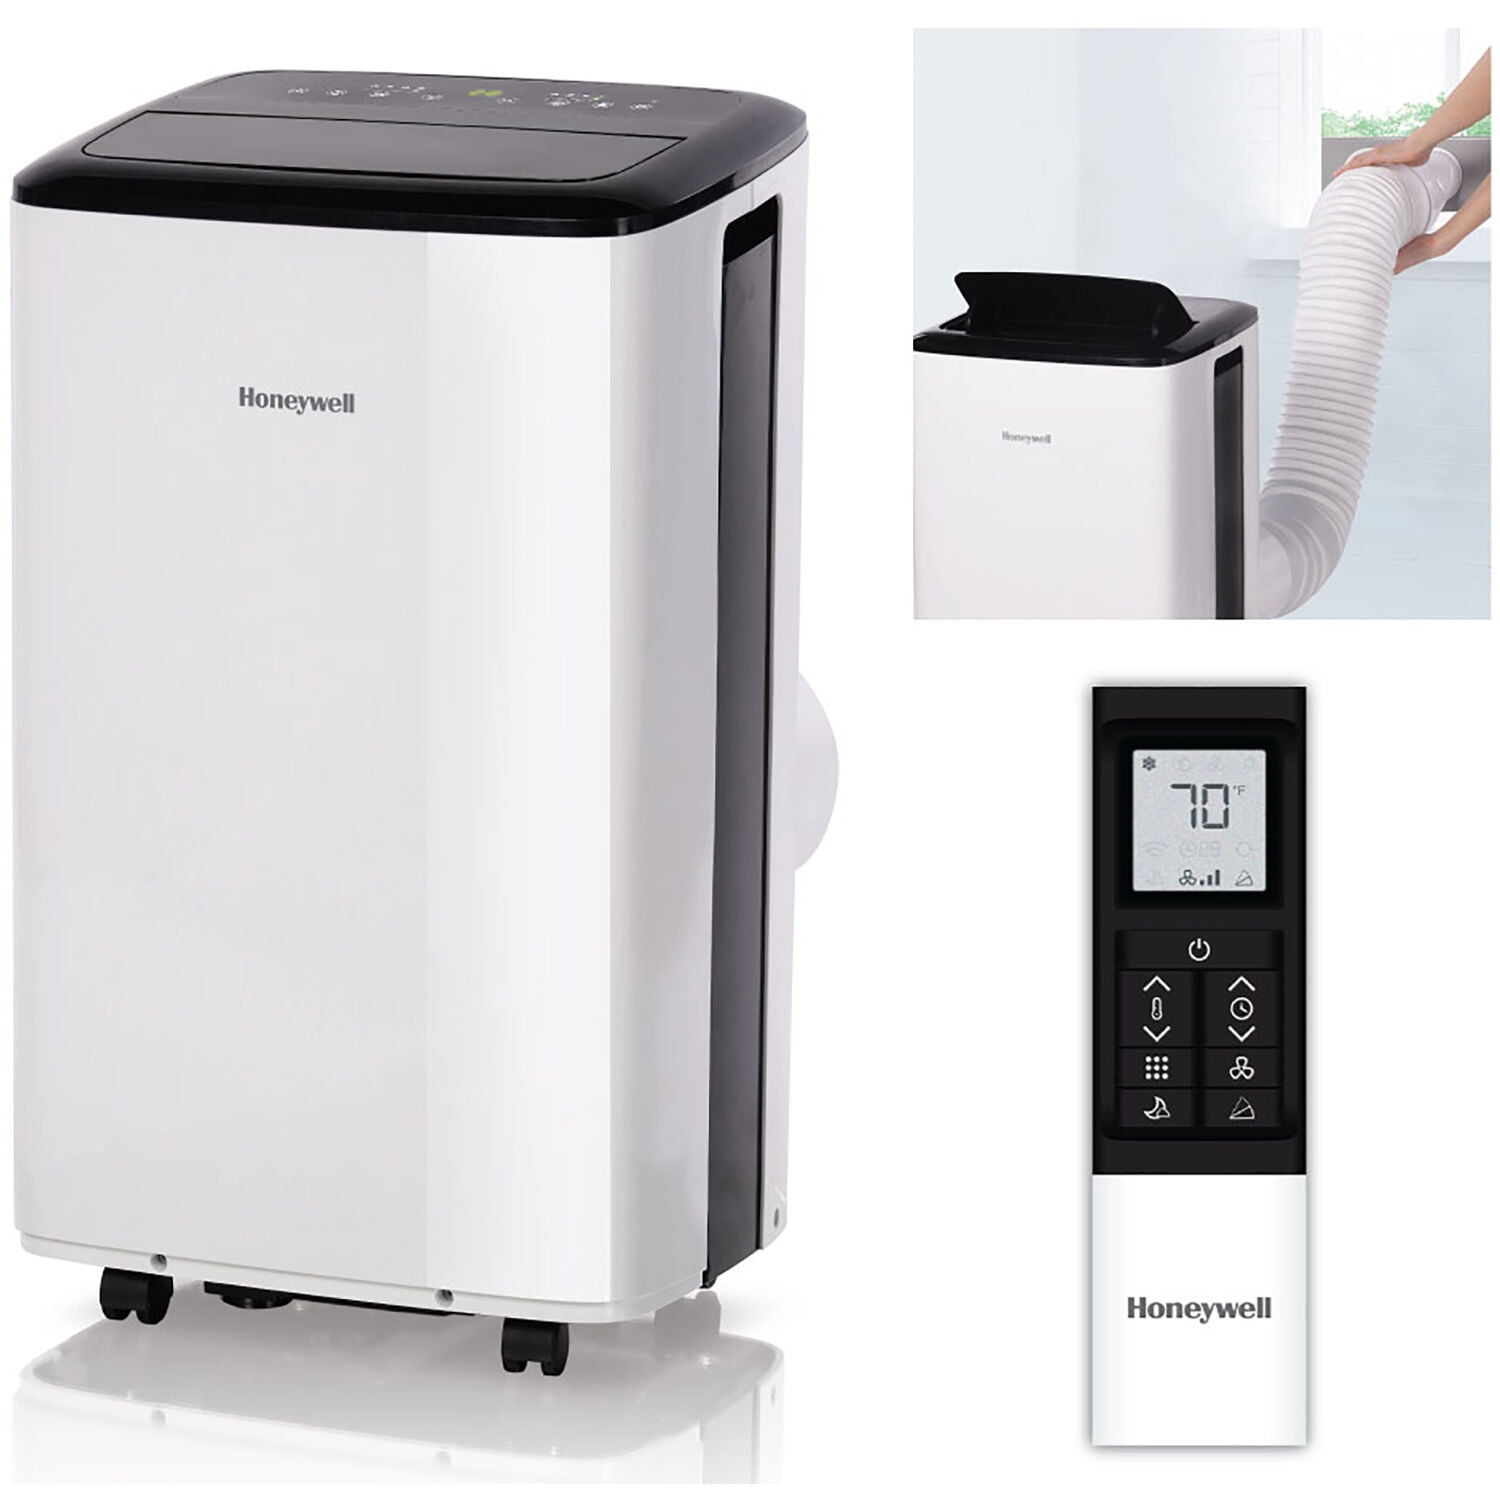 Honeywell 10,000 BTU Portable Air Conditioner with Wifi 